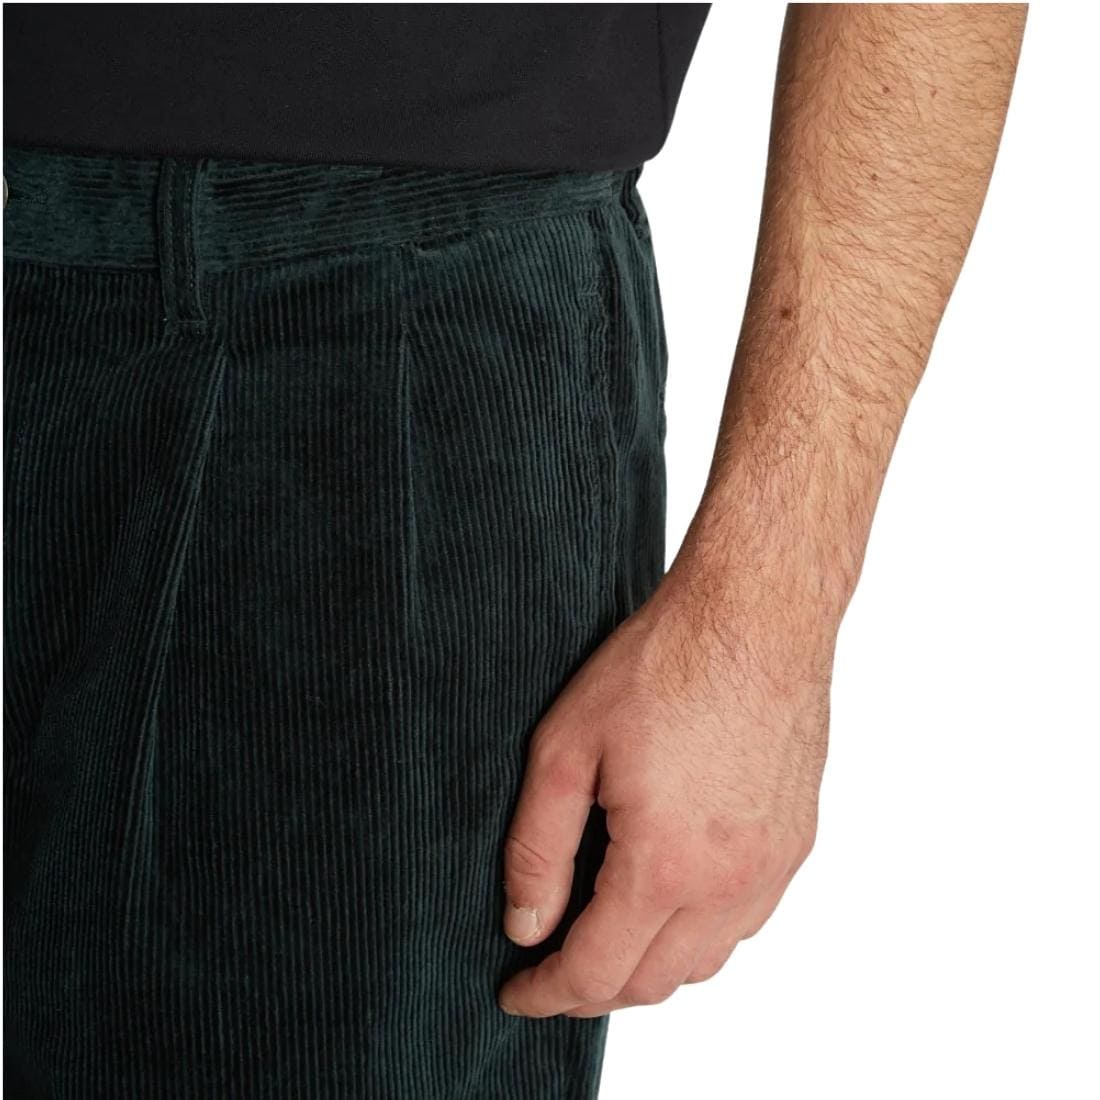 Green Corduroy Trousers – Christopher Korey Collective